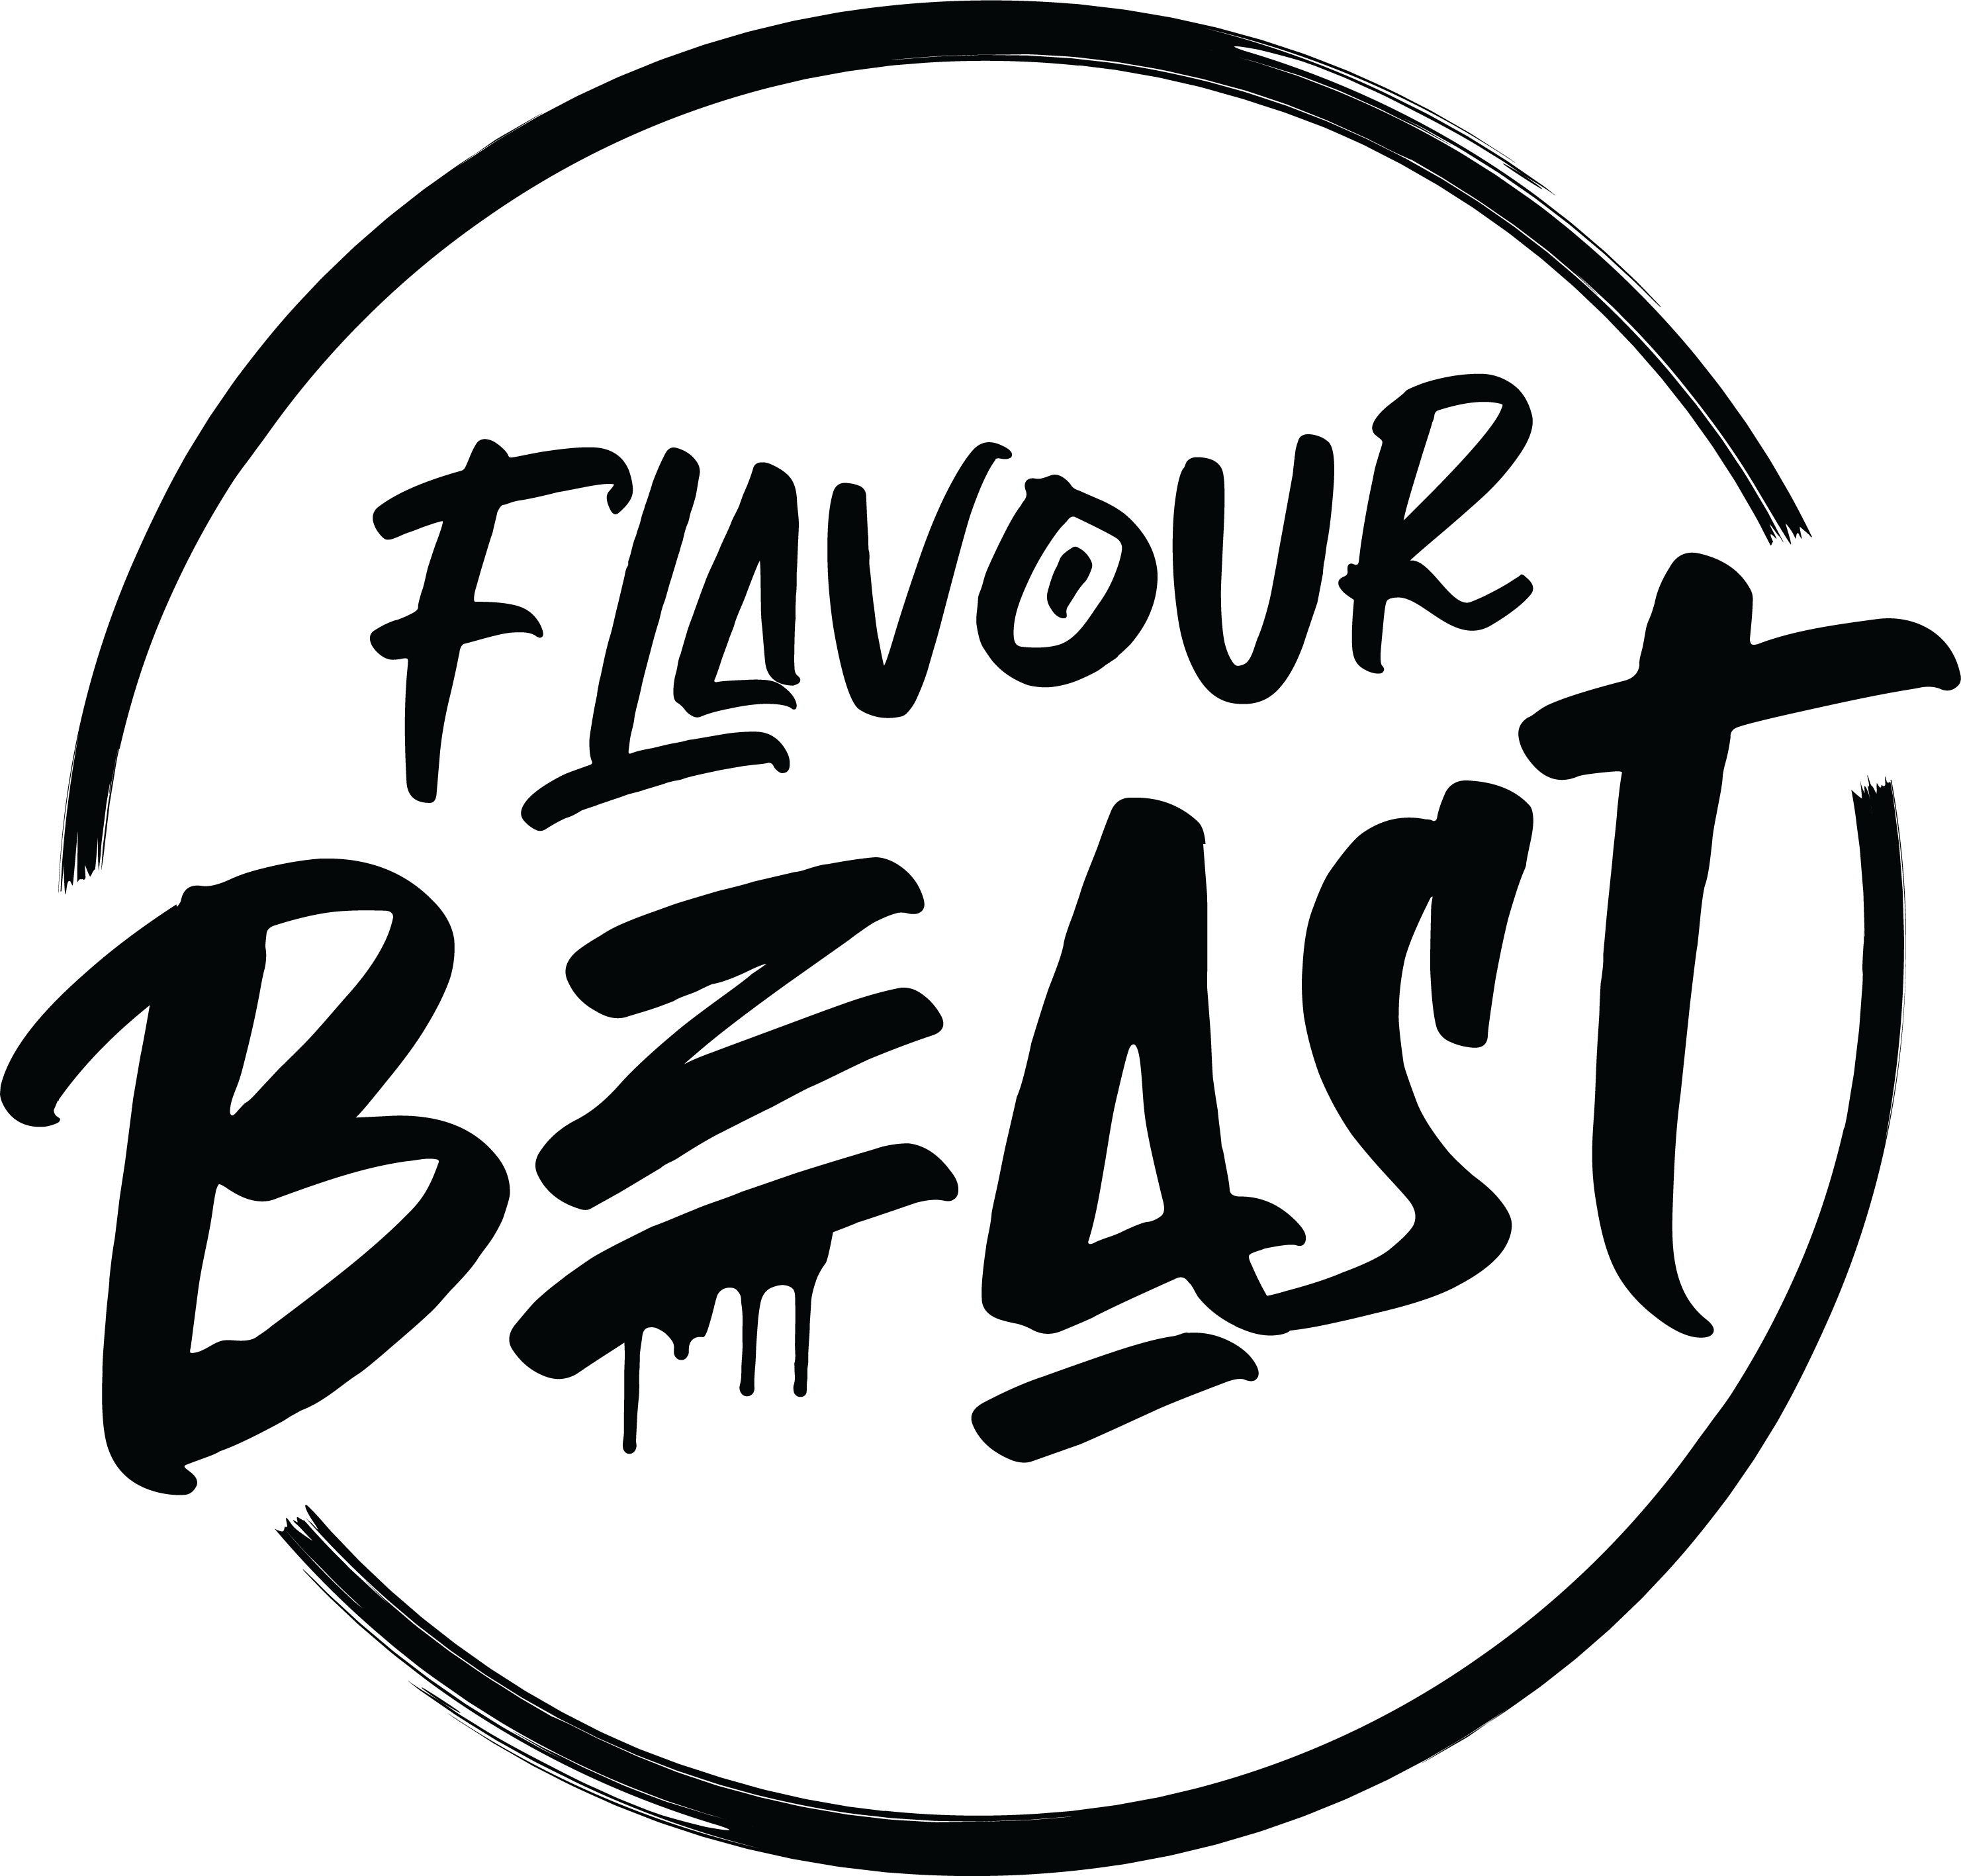 Shop Flavour Beast Disposable Vapes and Closed Pods online and in store at The Vape Store Canada.